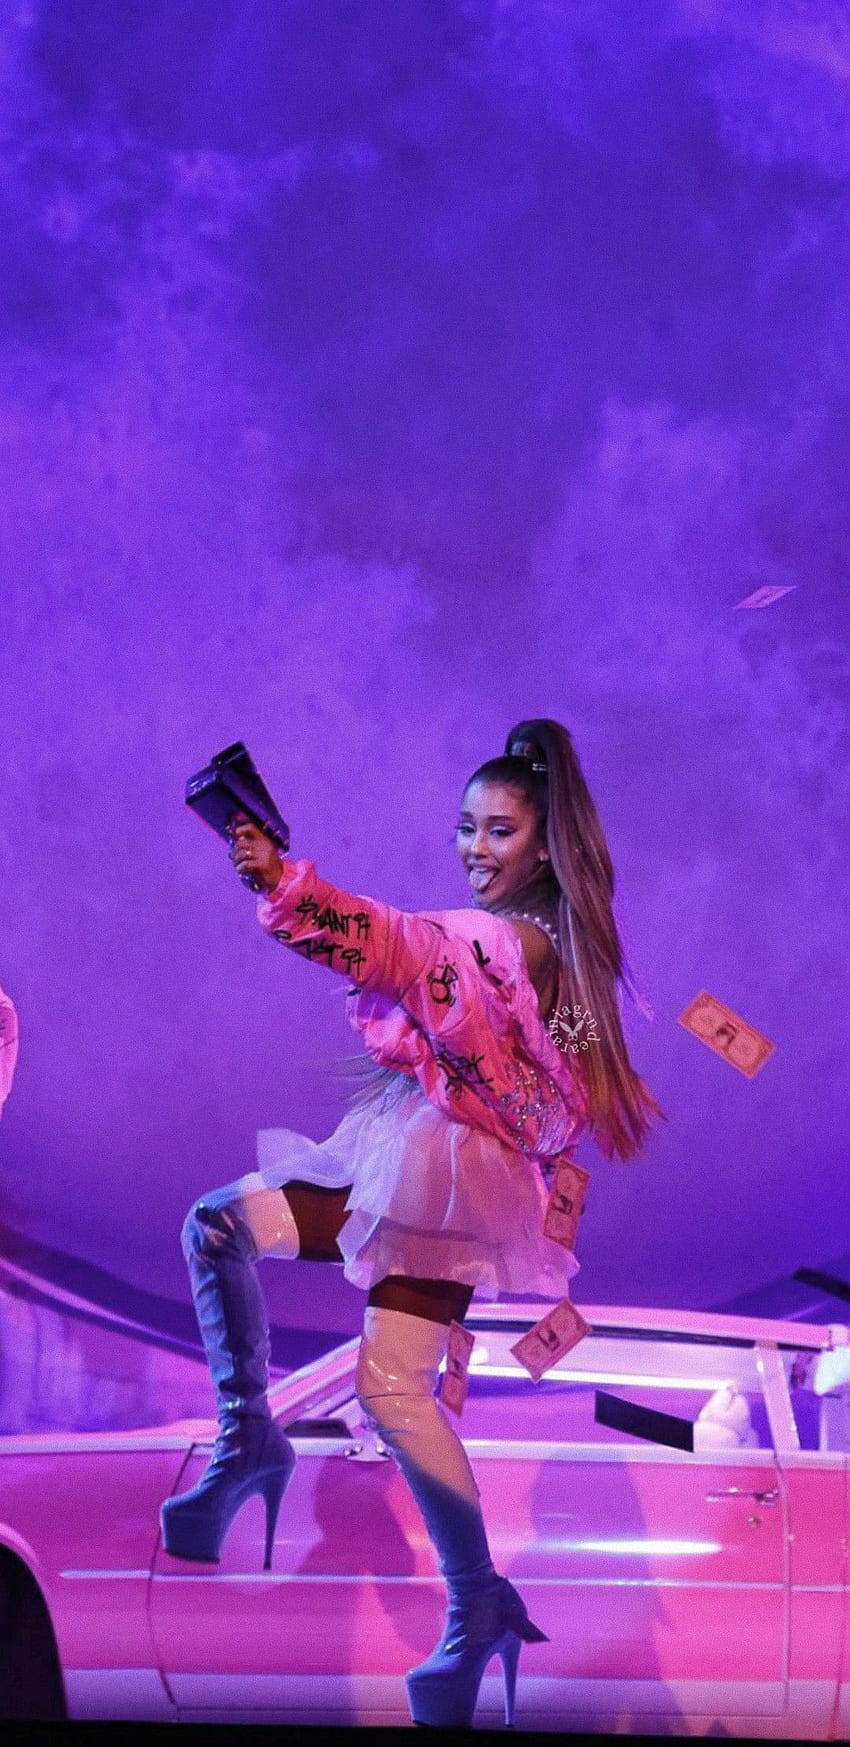 Watch Ariana Grande Perform “7 Rings” and “Thank U, Next” at Grammys 2020 |  Pitchfork